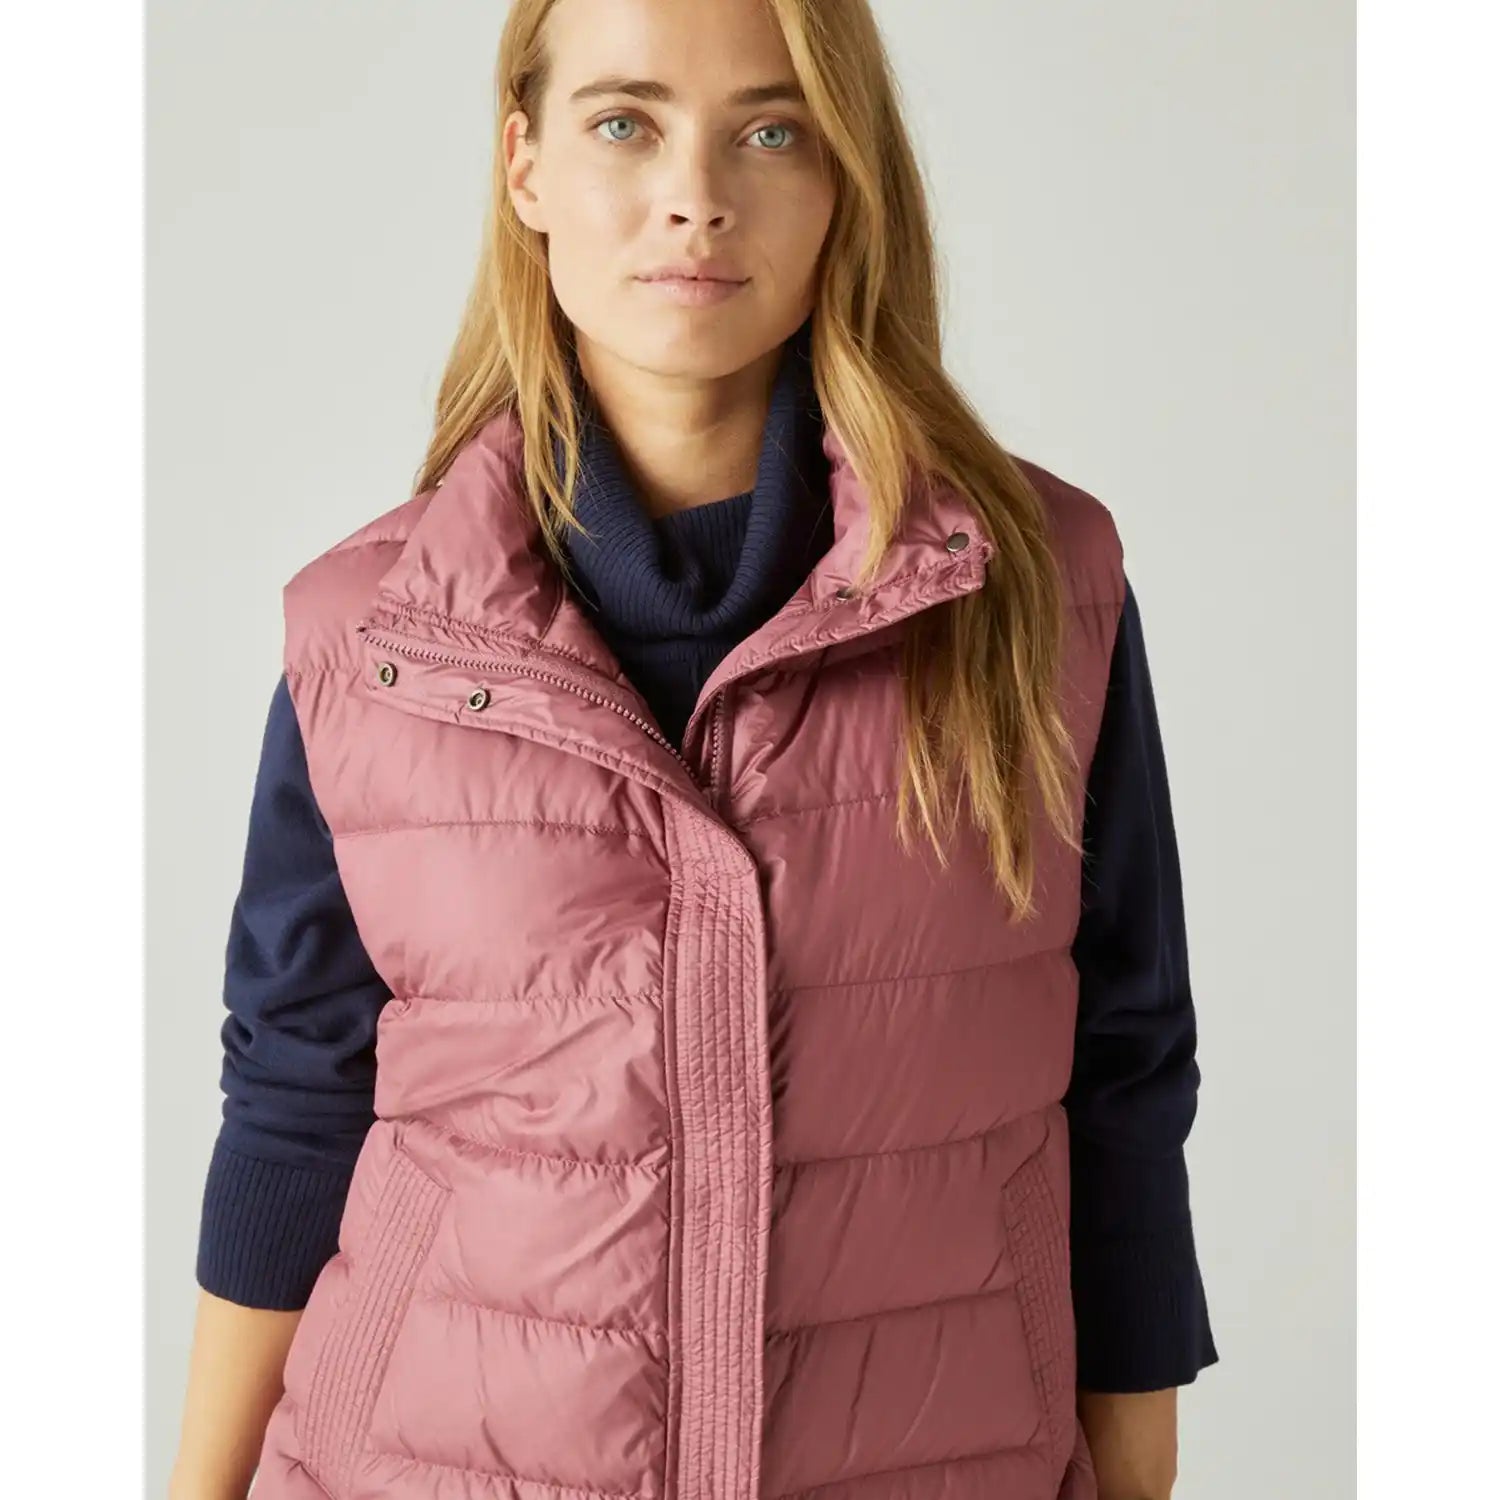 Couchel Ultralight Feather Vest - Pink 1 Shaws Department Stores